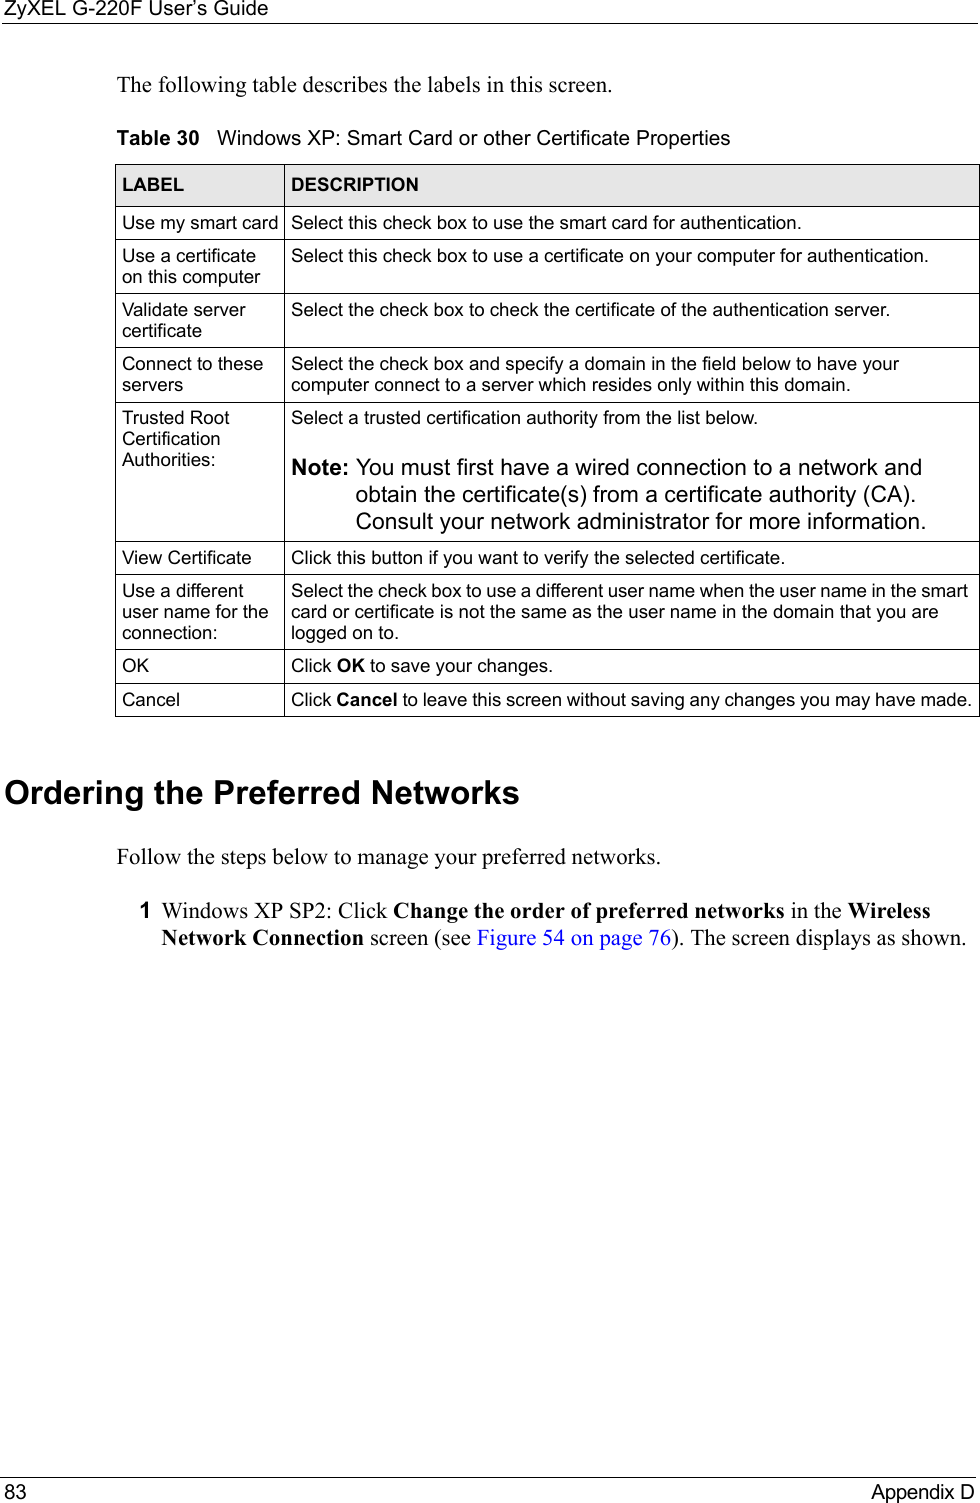 ZyXEL G-220F User’s Guide83  Appendix D The following table describes the labels in this screen.Ordering the Preferred NetworksFollow the steps below to manage your preferred networks.1Windows XP SP2: Click Change the order of preferred networks in the Wireless Network Connection screen (see Figure 54 on page 76). The screen displays as shown. Table 30   Windows XP: Smart Card or other Certificate PropertiesLABEL DESCRIPTIONUse my smart card Select this check box to use the smart card for authentication.Use a certificate on this computerSelect this check box to use a certificate on your computer for authentication.Validate server certificateSelect the check box to check the certificate of the authentication server.Connect to these serversSelect the check box and specify a domain in the field below to have your computer connect to a server which resides only within this domain. Trusted Root Certification Authorities:Select a trusted certification authority from the list below.Note: You must first have a wired connection to a network and obtain the certificate(s) from a certificate authority (CA). Consult your network administrator for more information.View Certificate Click this button if you want to verify the selected certificate.Use a different user name for the connection:Select the check box to use a different user name when the user name in the smart card or certificate is not the same as the user name in the domain that you are logged on to.OK Click OK to save your changes.Cancel Click Cancel to leave this screen without saving any changes you may have made.